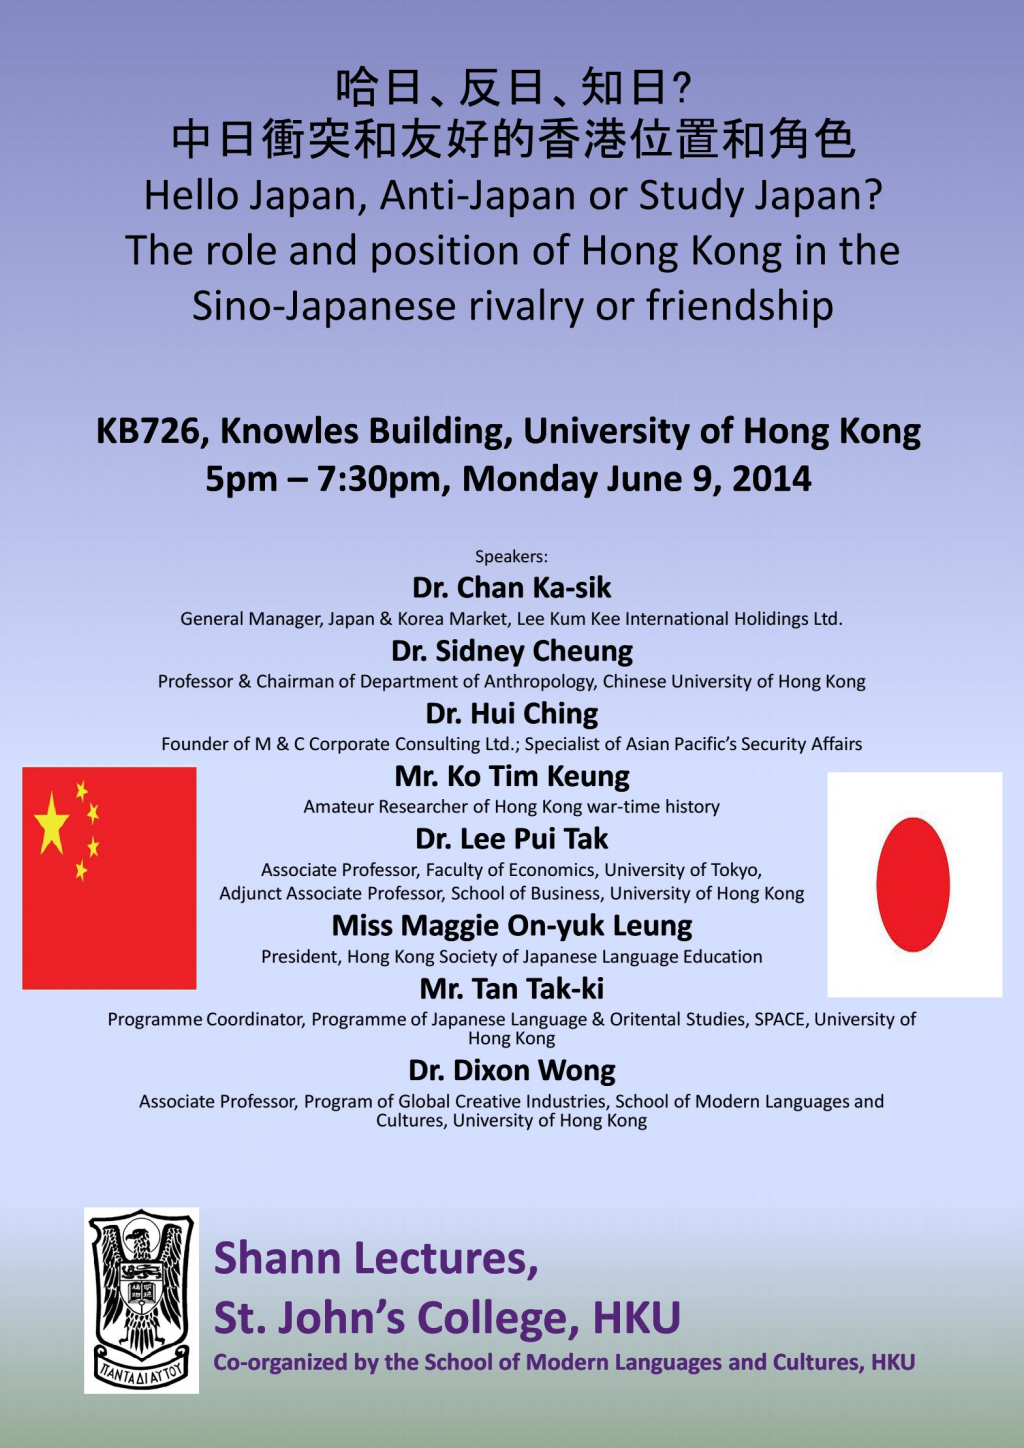 The College of St John's the Evangelist, HKU, has the pleasure of inviting all Students of HKU to participate in the Shann Lectures 2014: